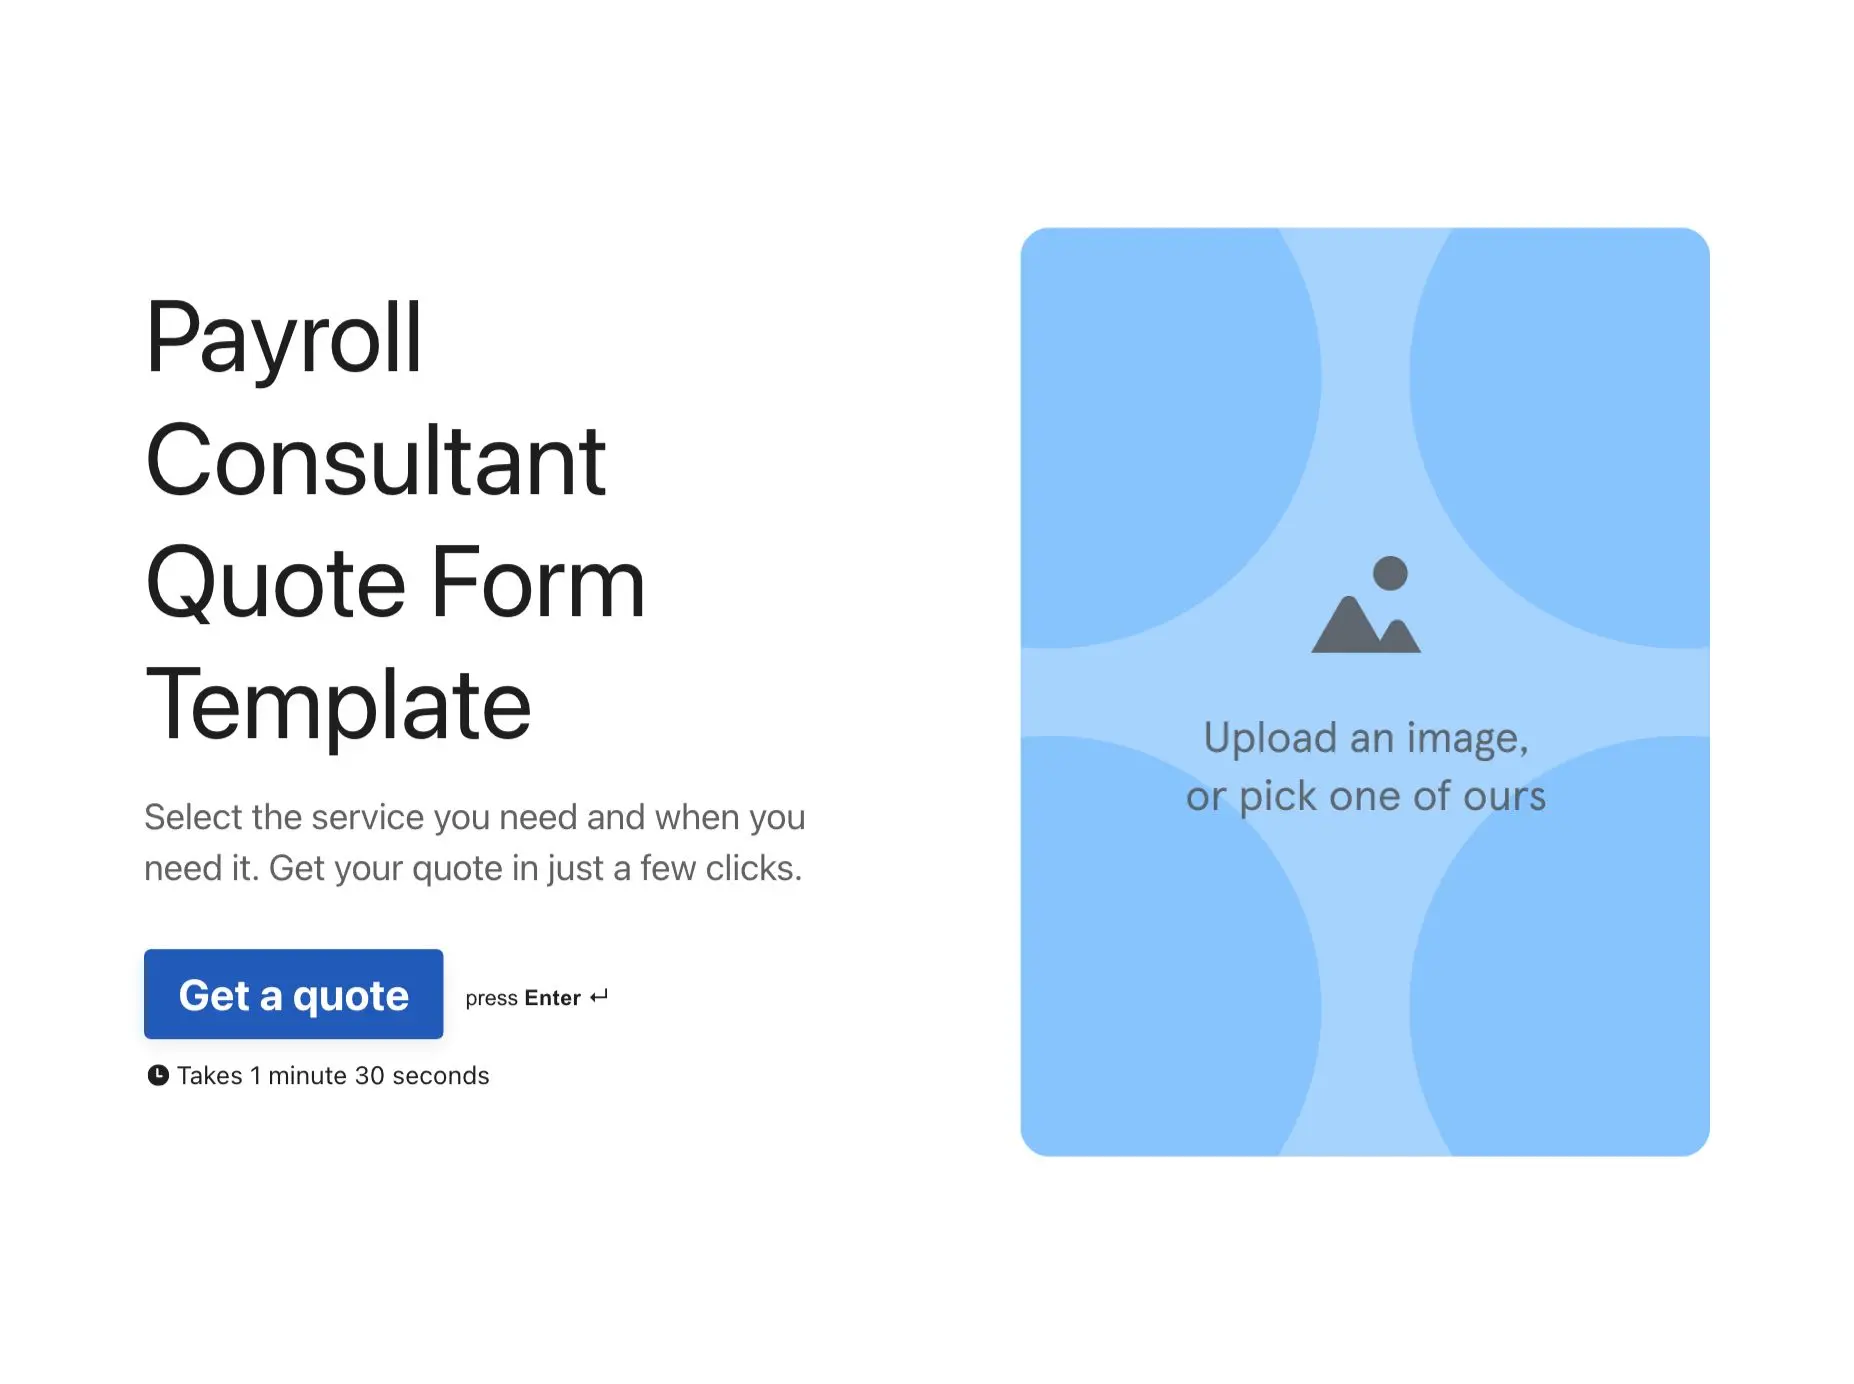 Payroll Consultant Quote Form Template Hero